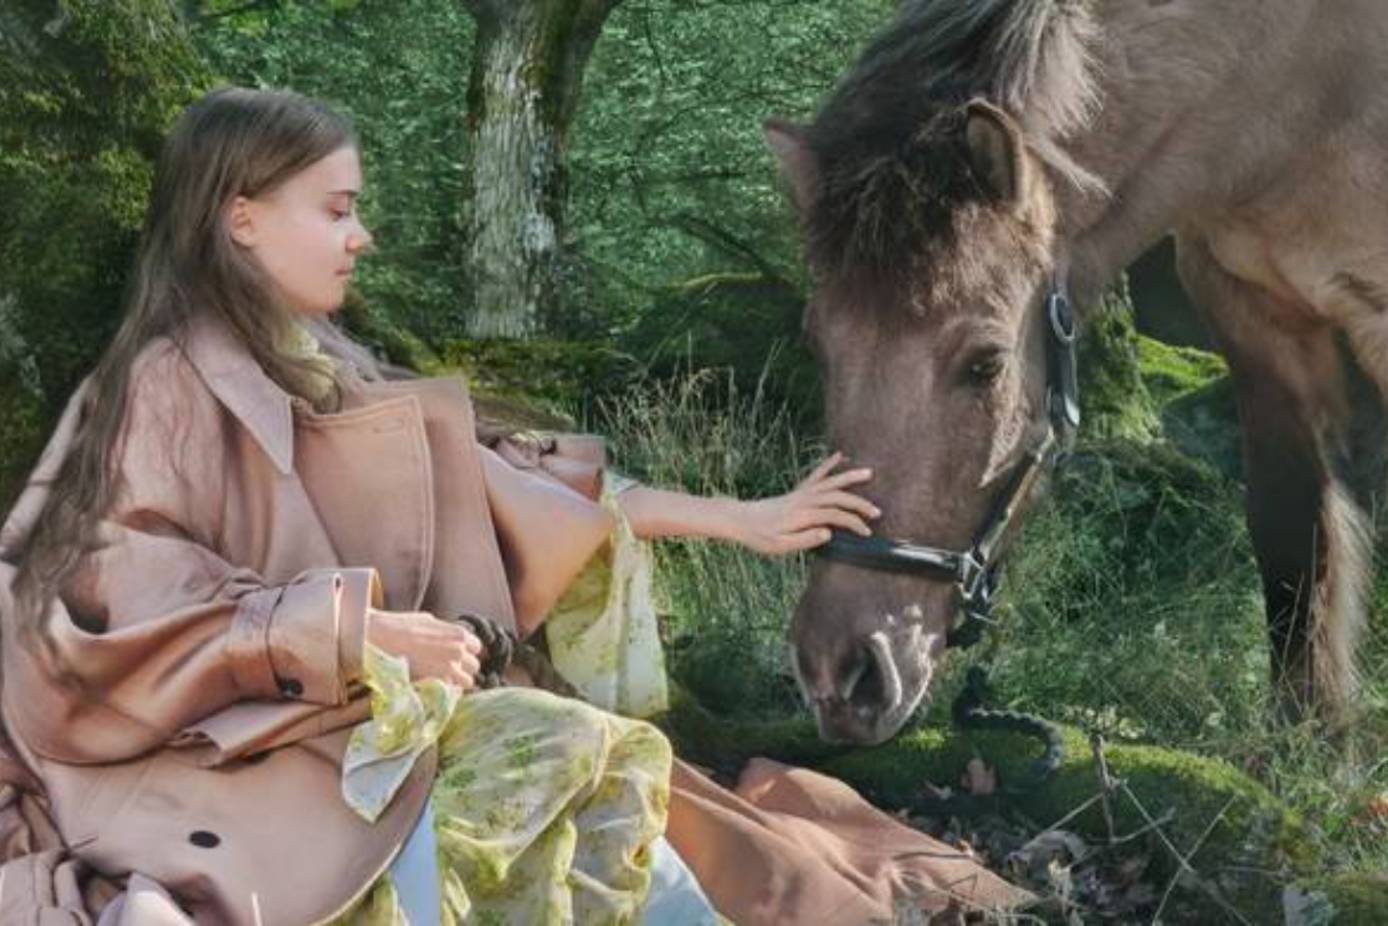 Greta Thunberg graces first cover of Vogue Scandinavia, which aims to  become the world's most sustainable publication